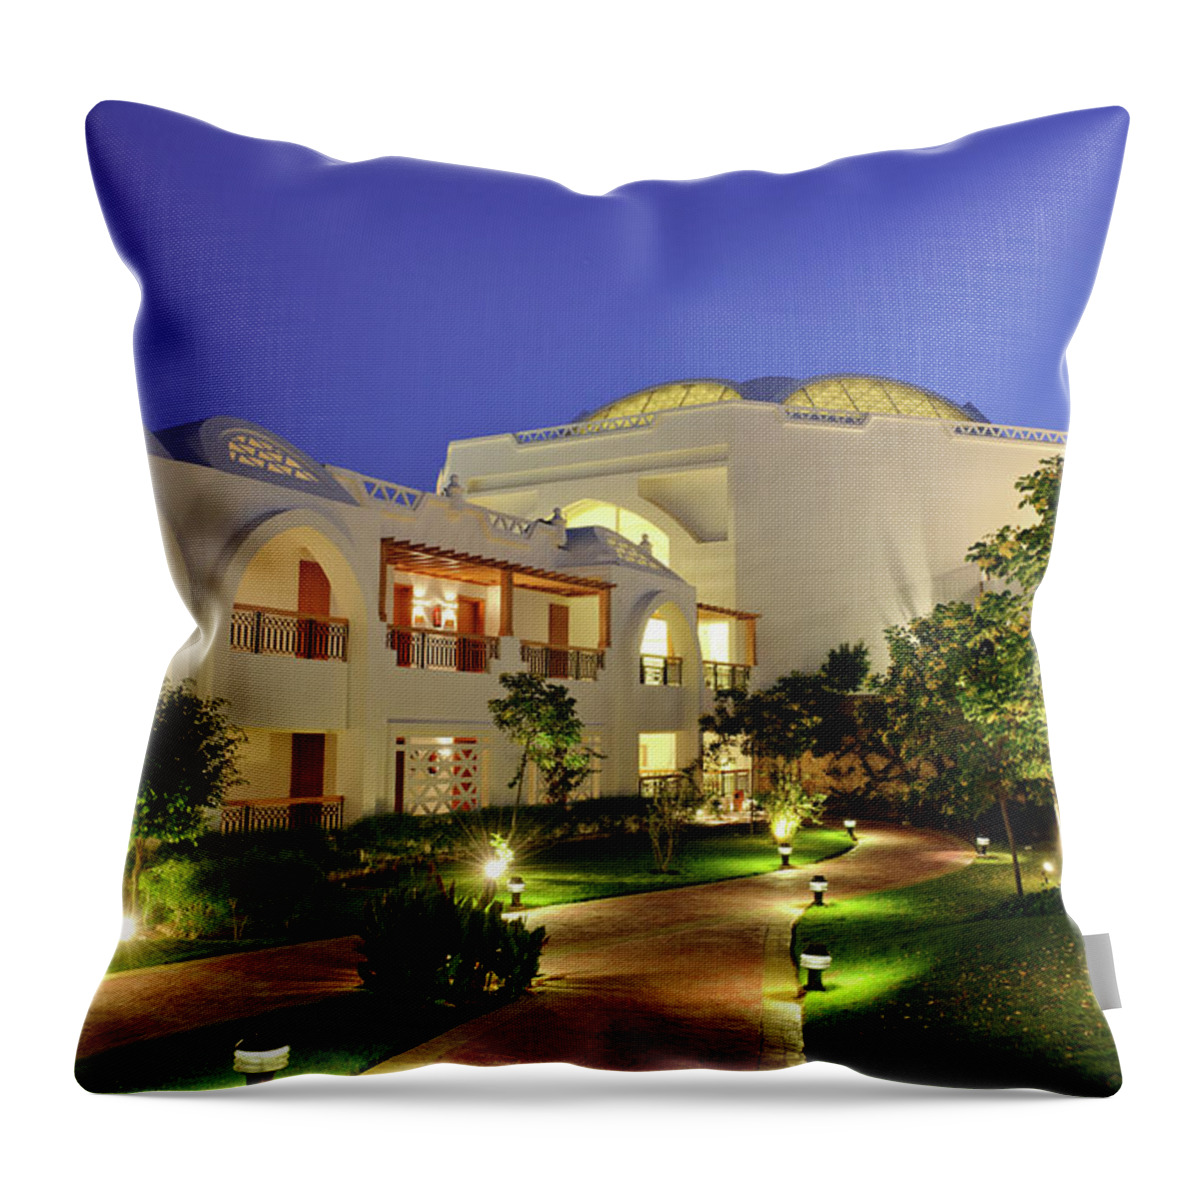 Holiday Throw Pillow featuring the photograph Luxury Hotel Resort by Cunfek